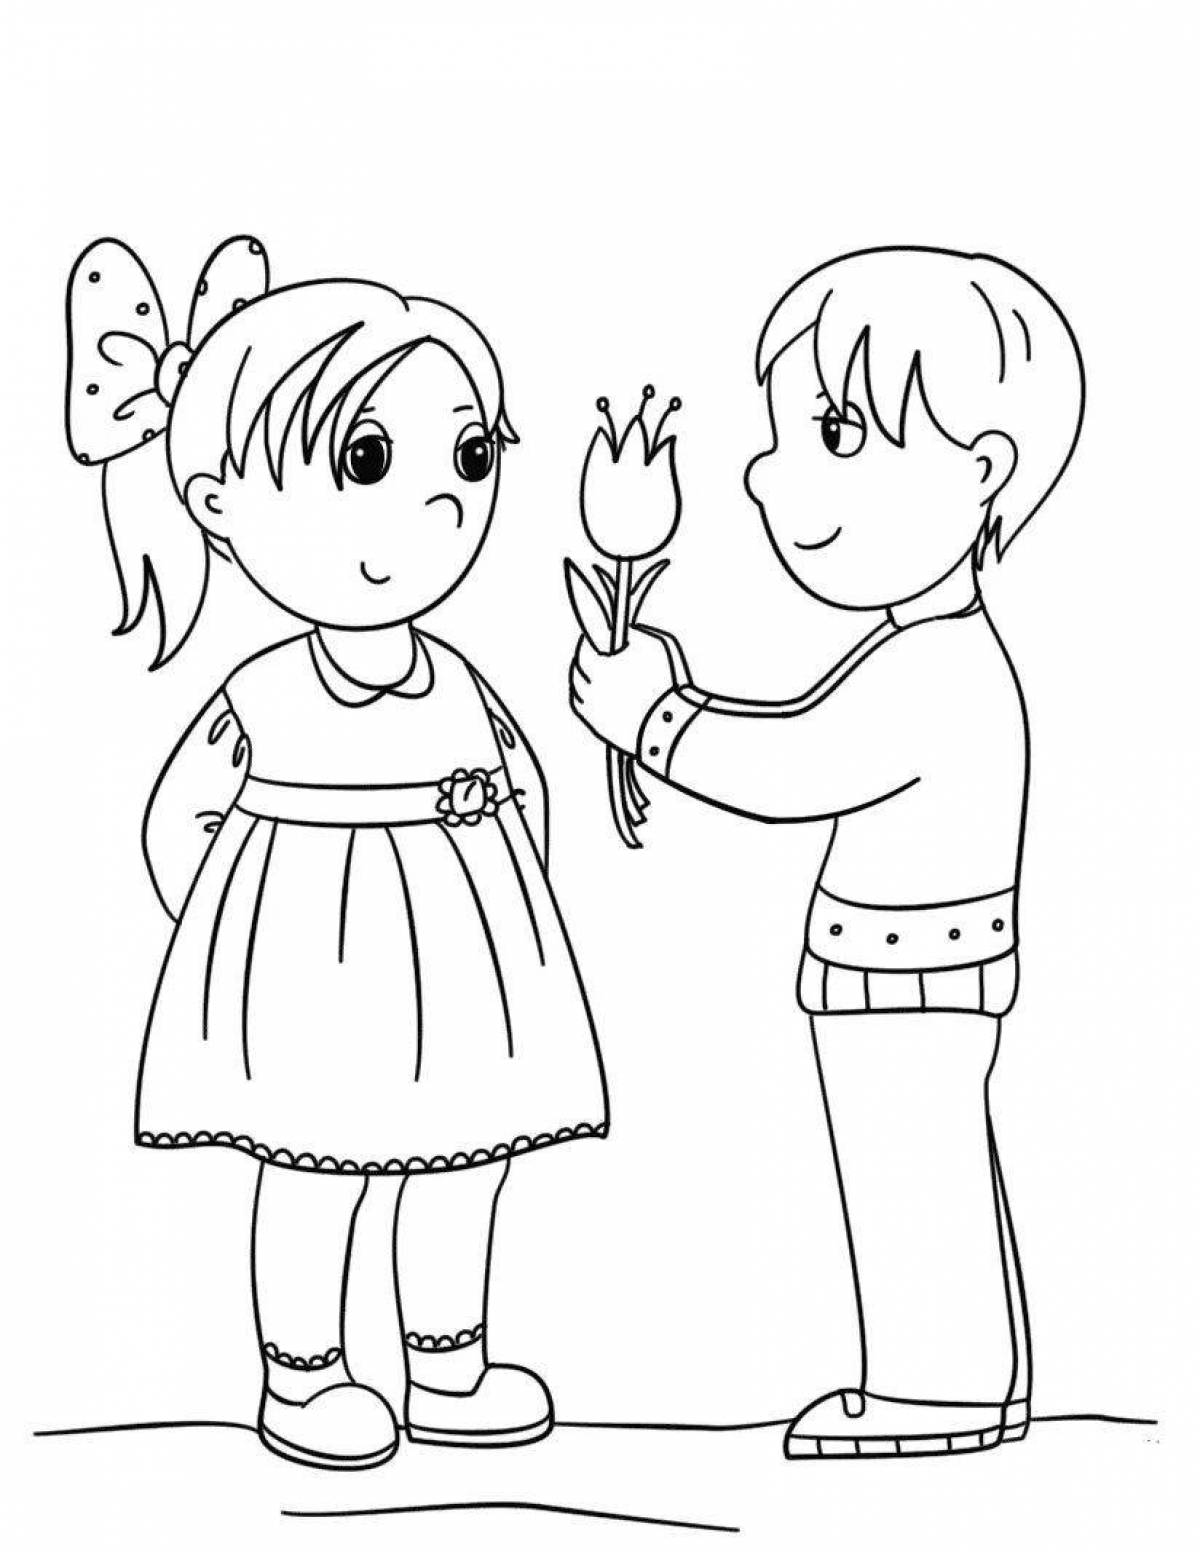 Let's coloring page